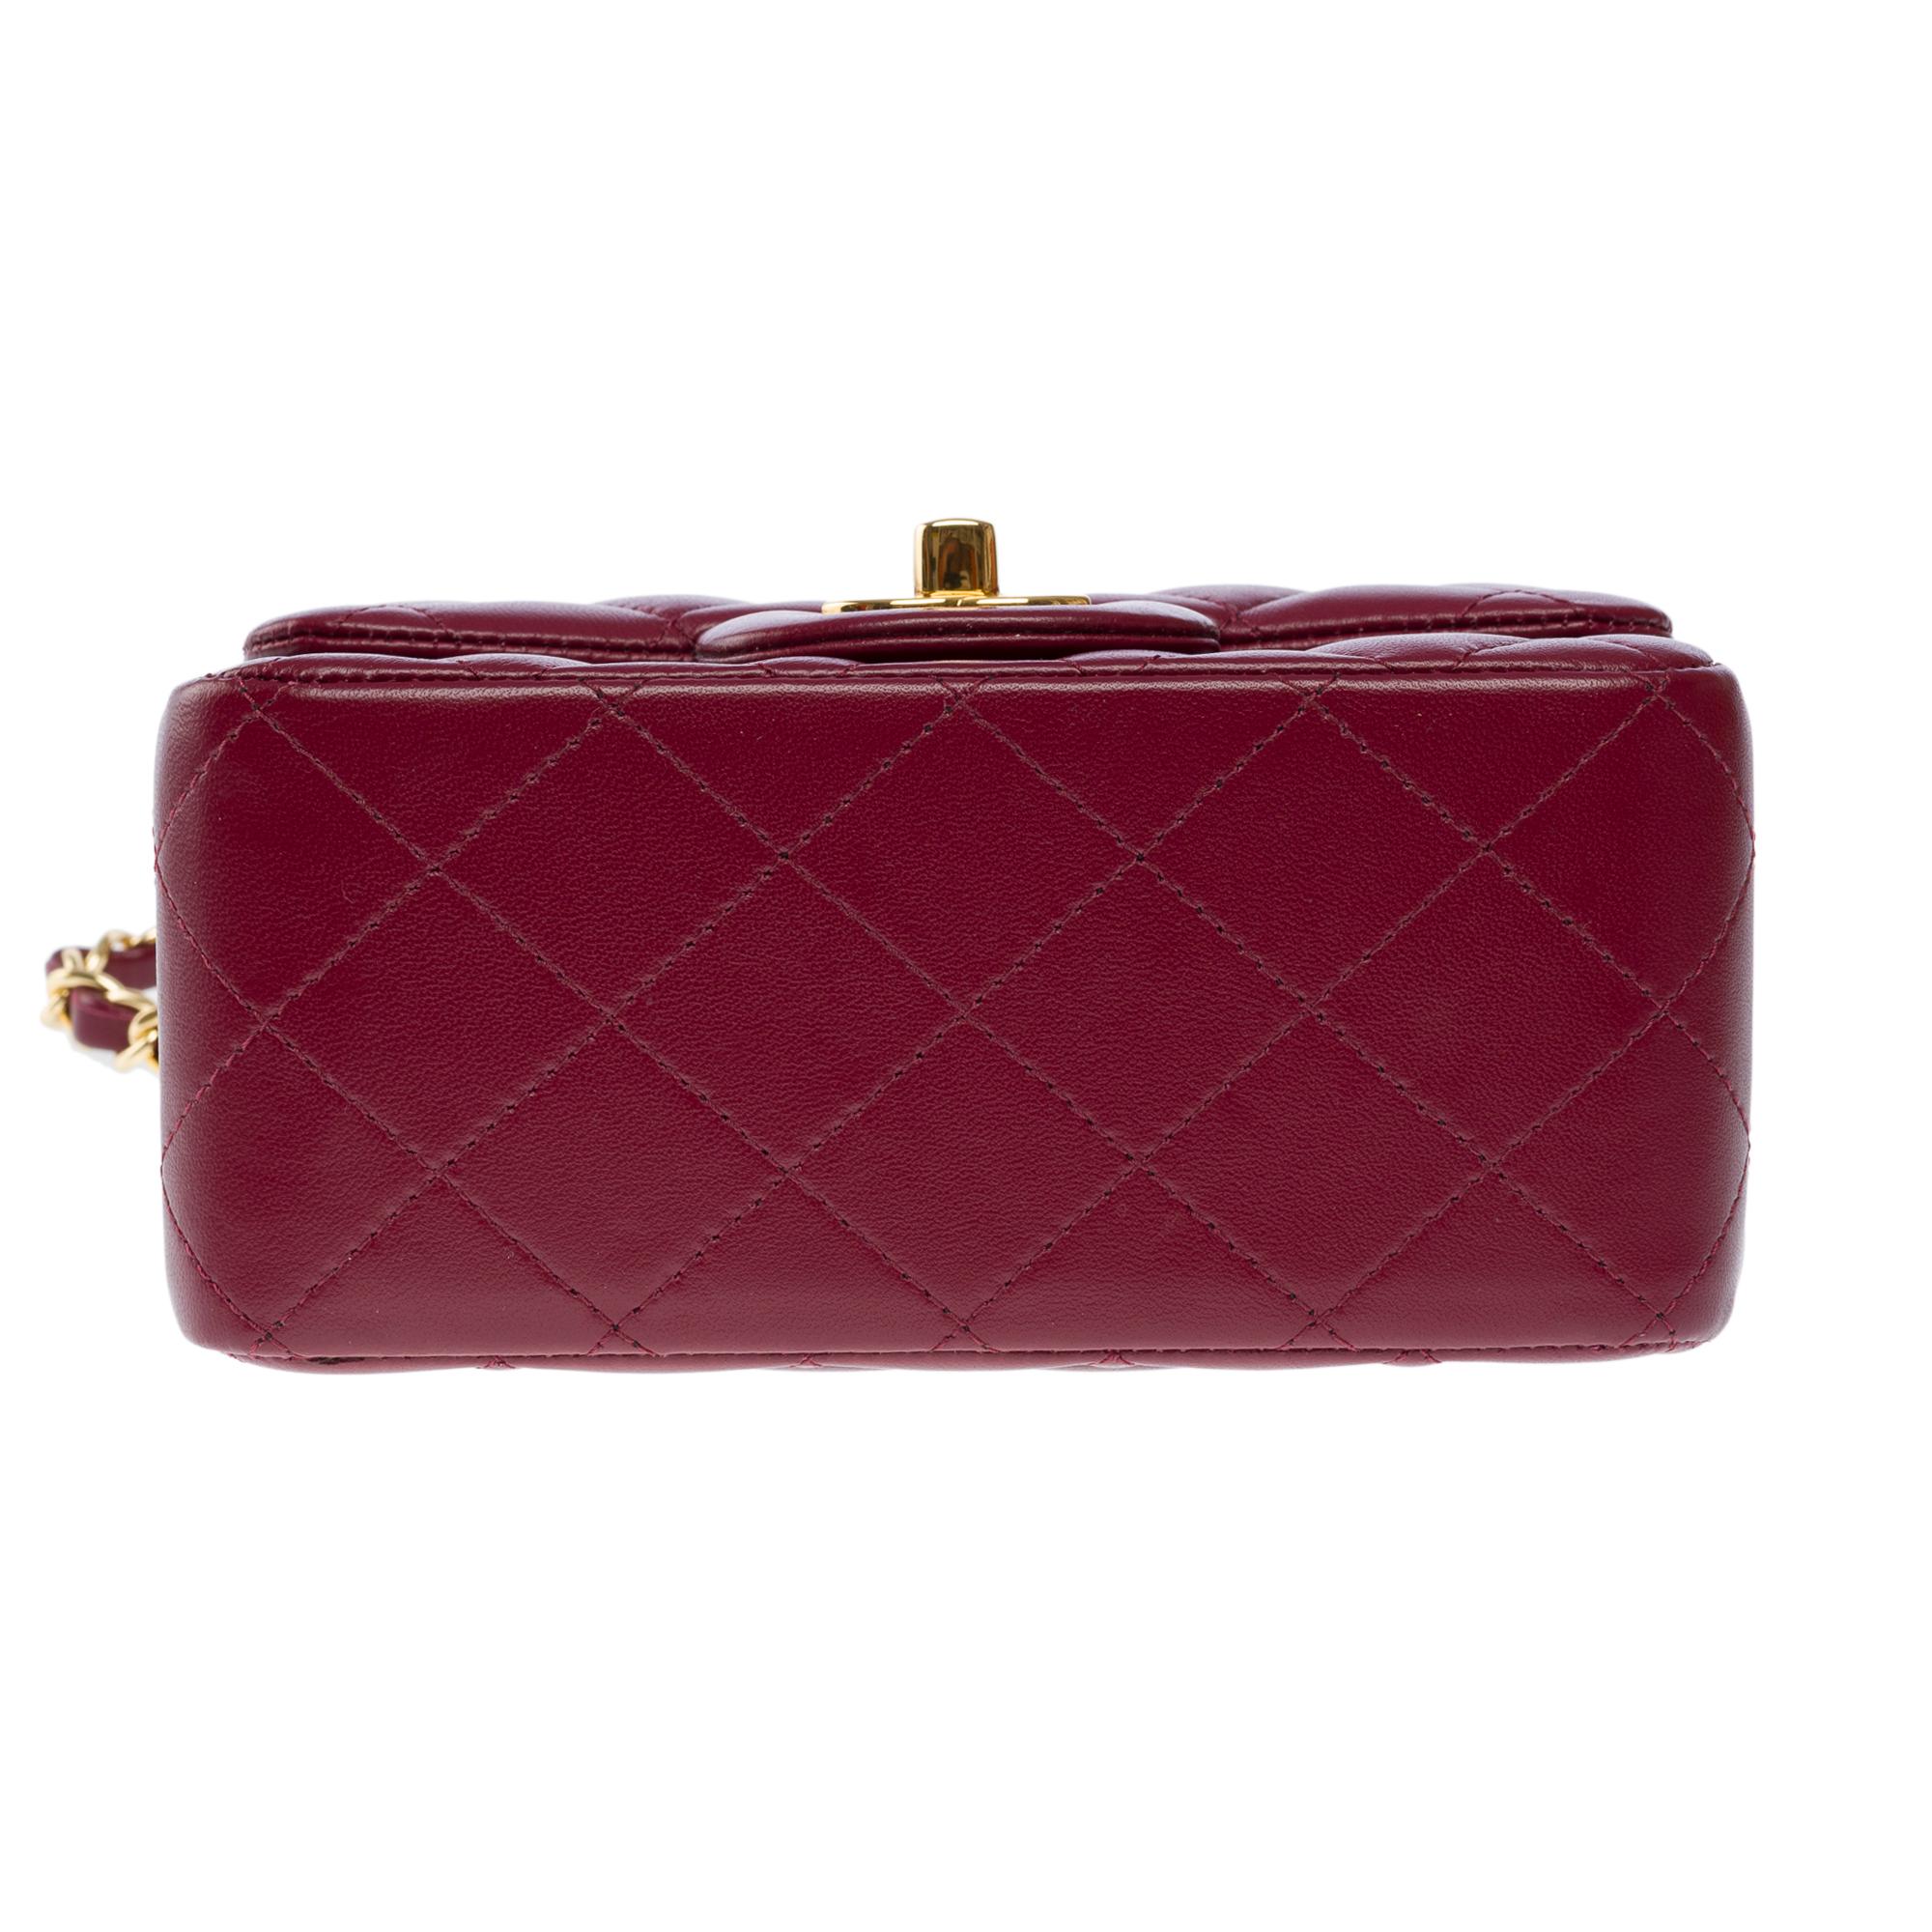 Gorgeous Chanel Mini Timeless Shoulder flap bag in Plum quilted leather, GHW For Sale 7